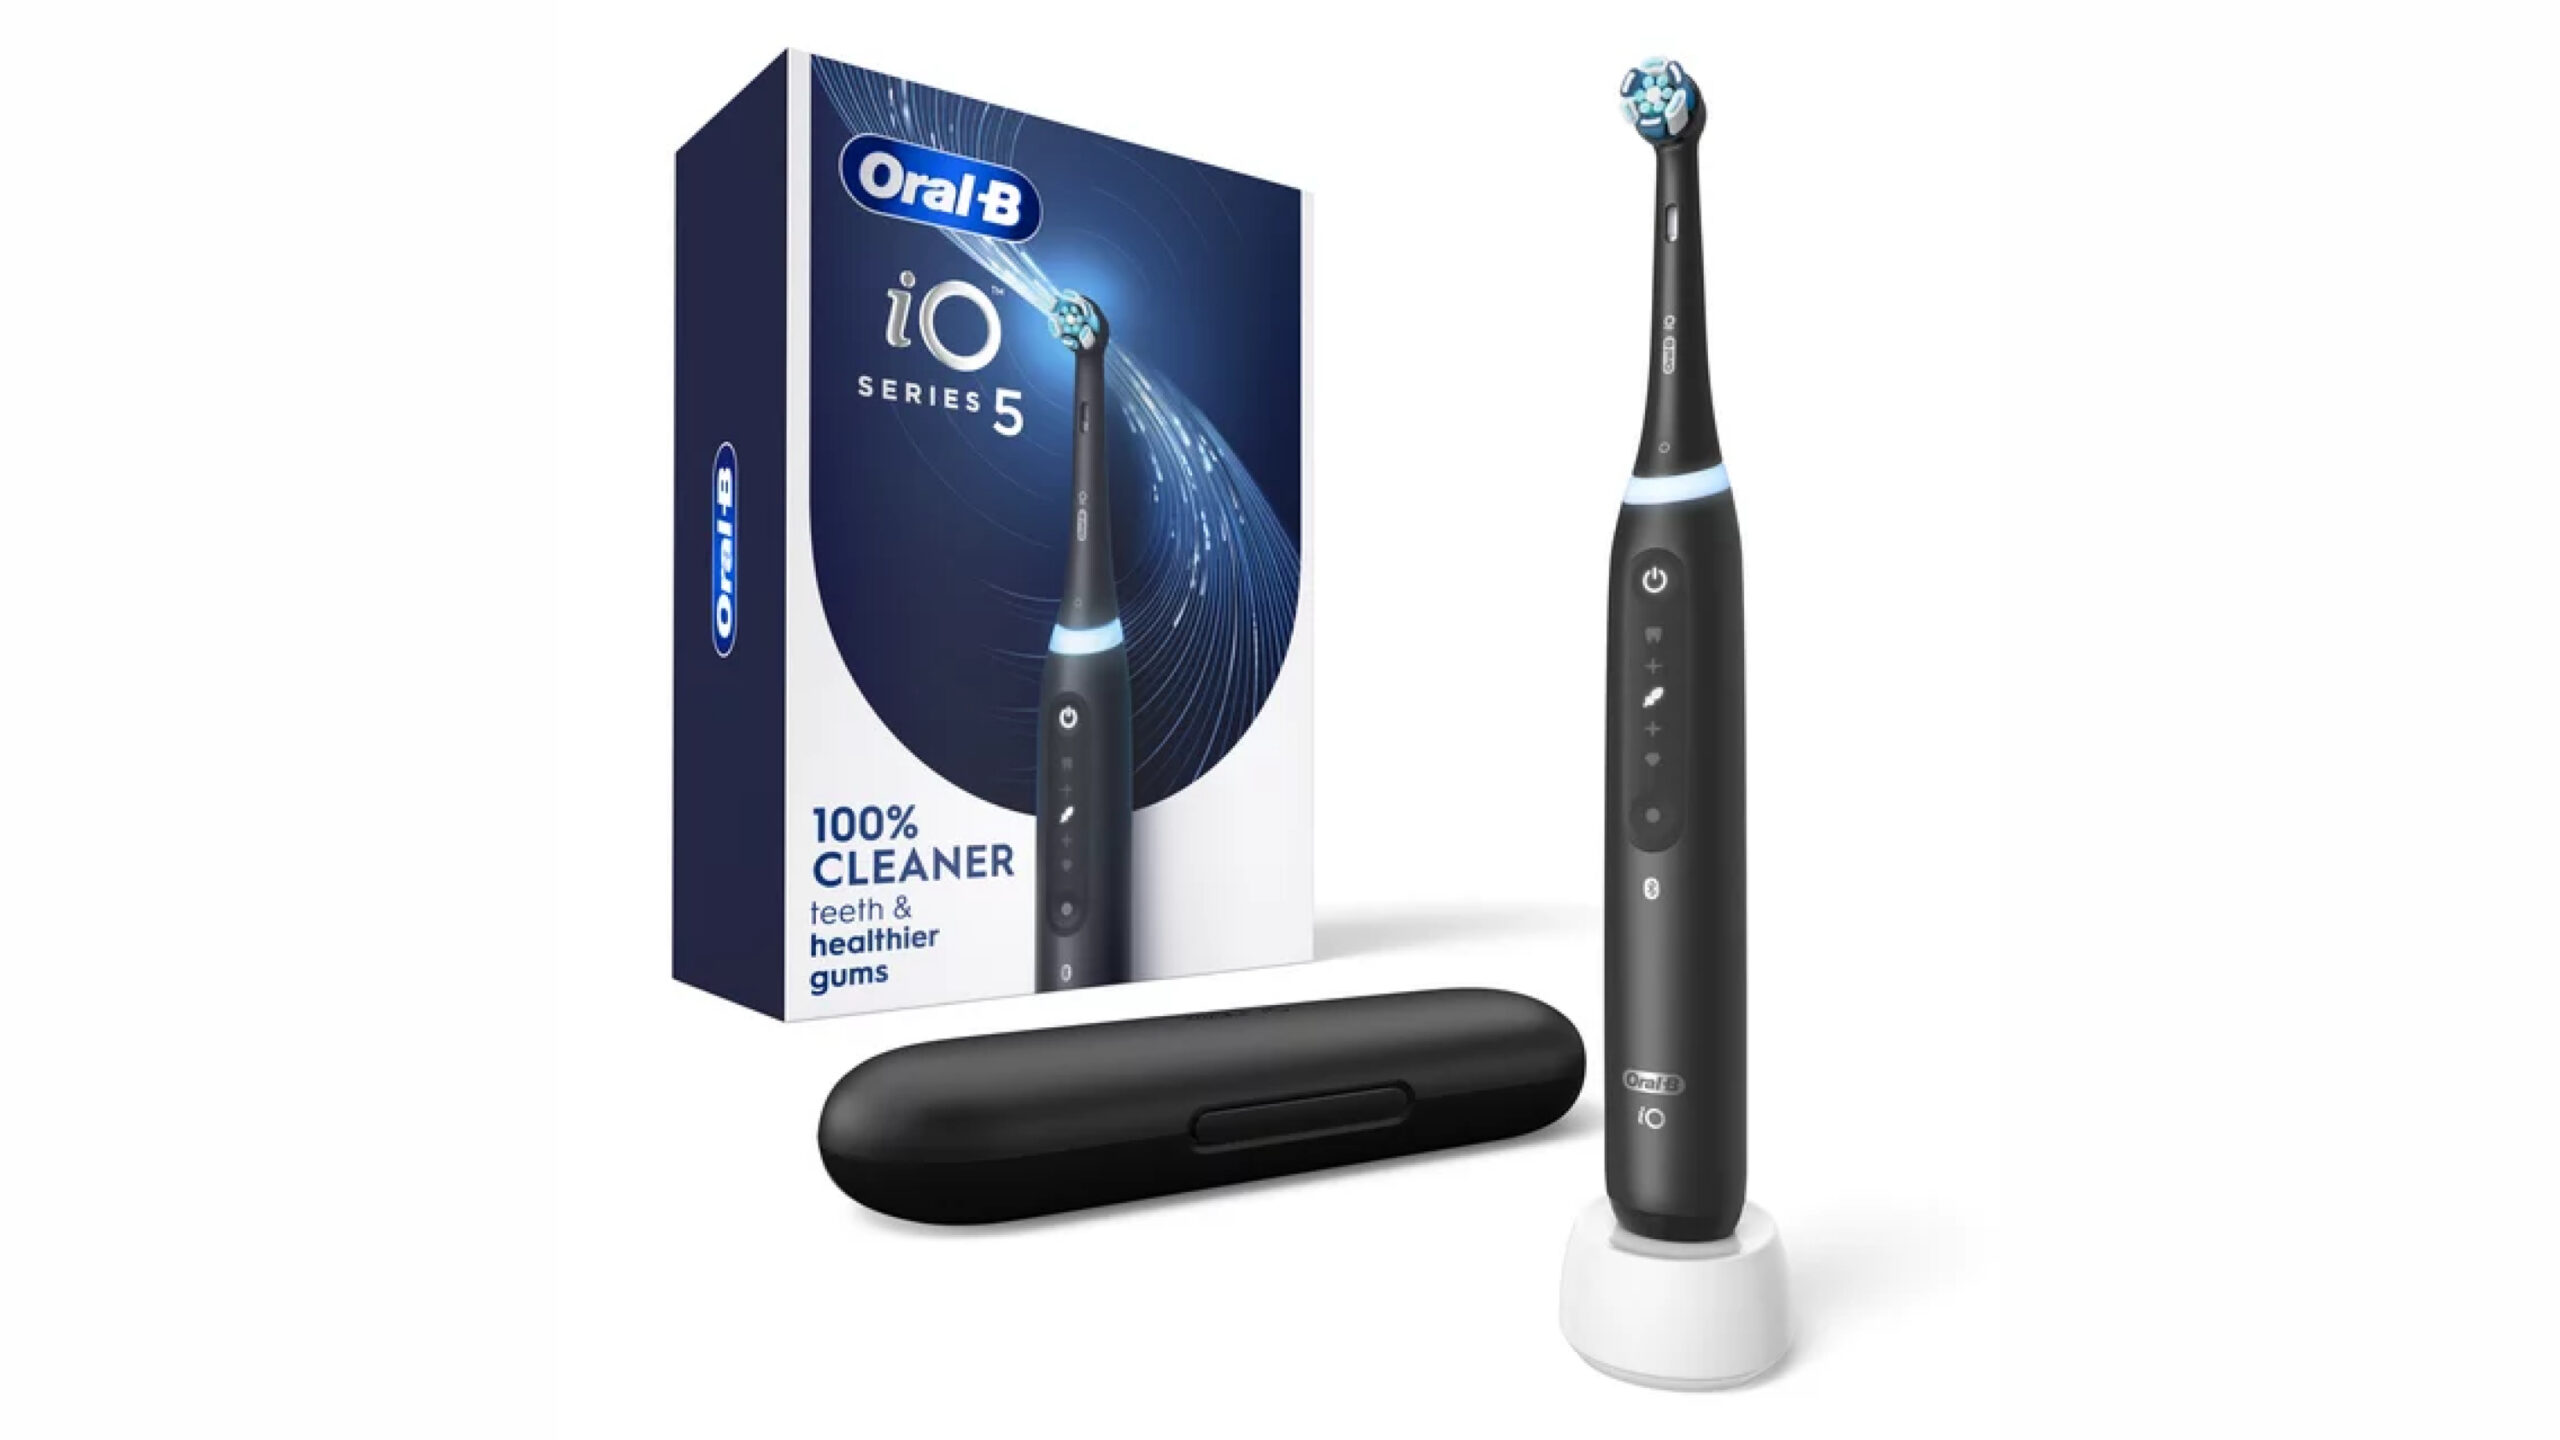 packet and display of oral b io series 5 electric toothbrush